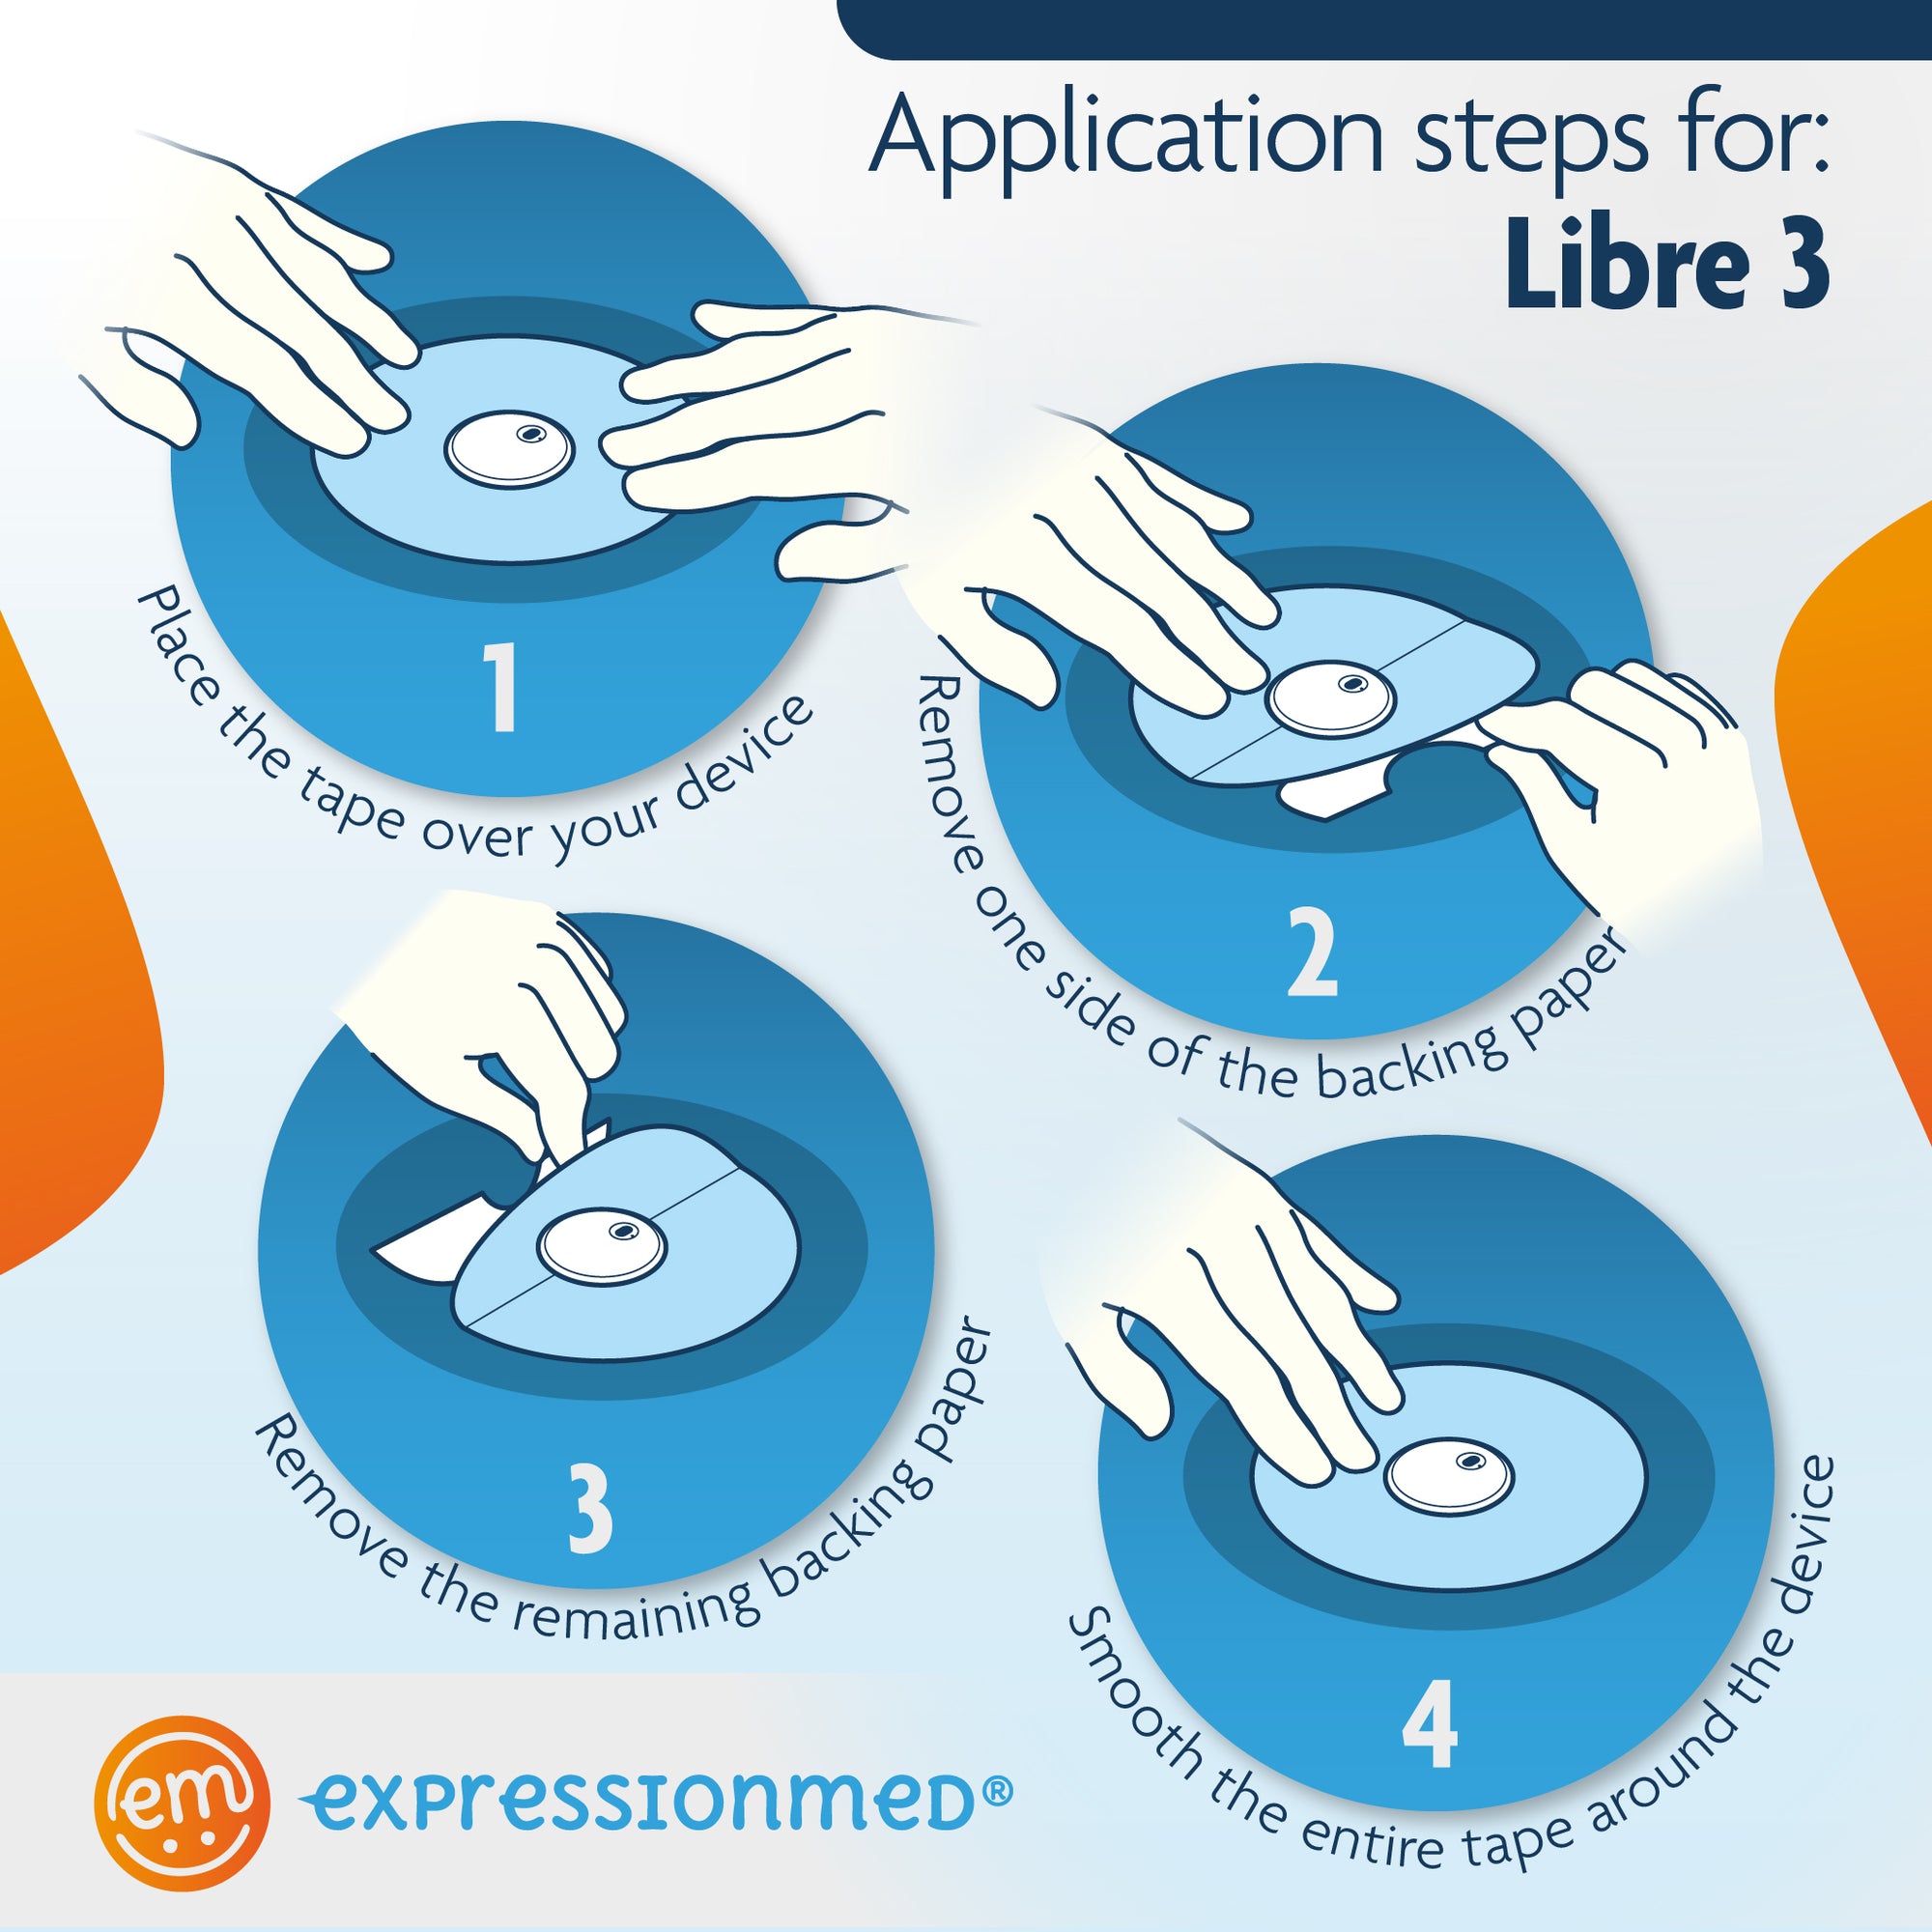 ExpressionMed Libre 3 Perfect Fit Adhesive Tape Application Instructions, Fixing Ring